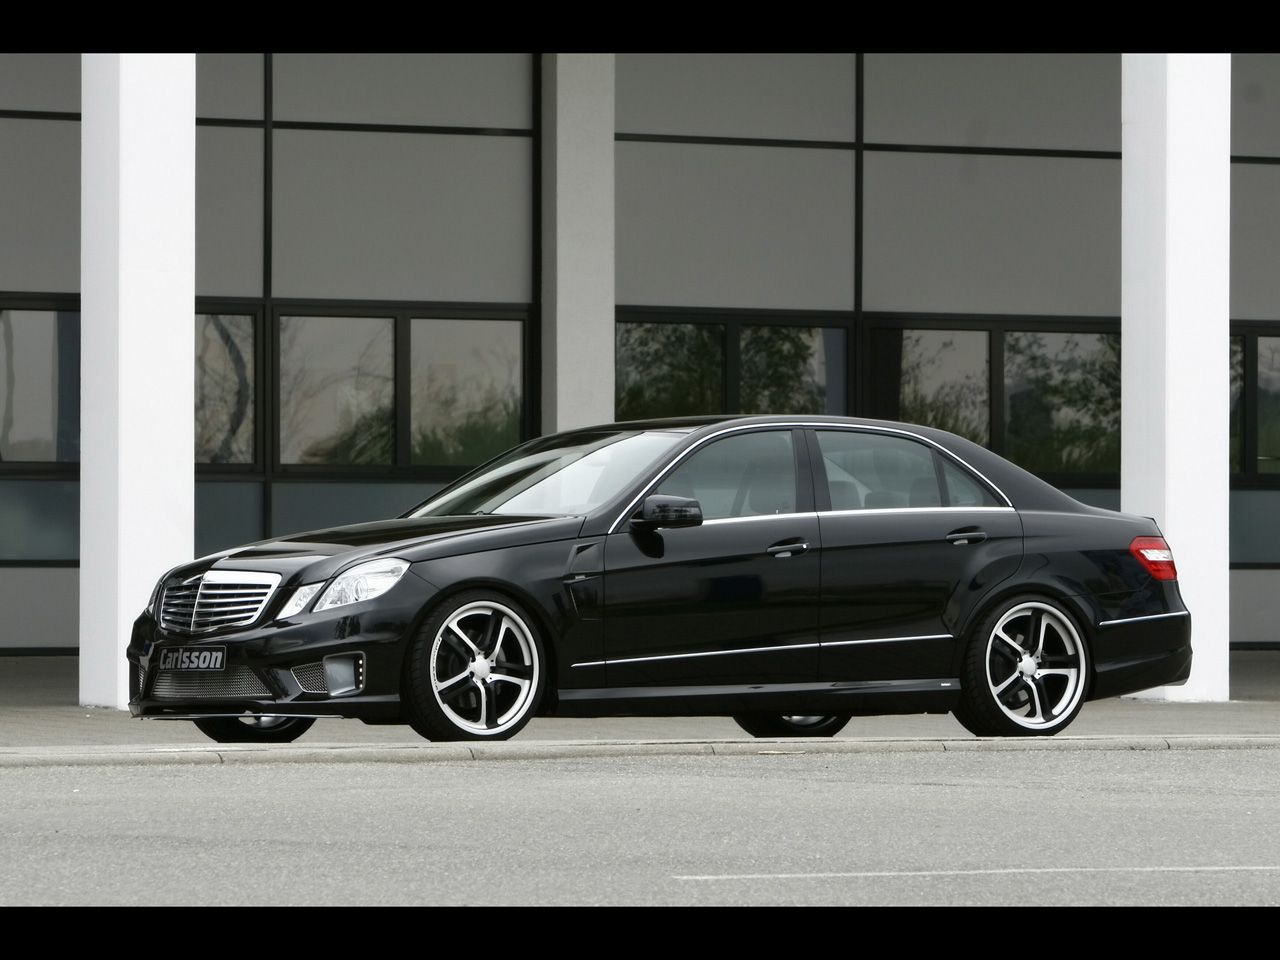 2009 Carlsson Mercedes-Benz E-Class - Front And Side - 1280x960 ...